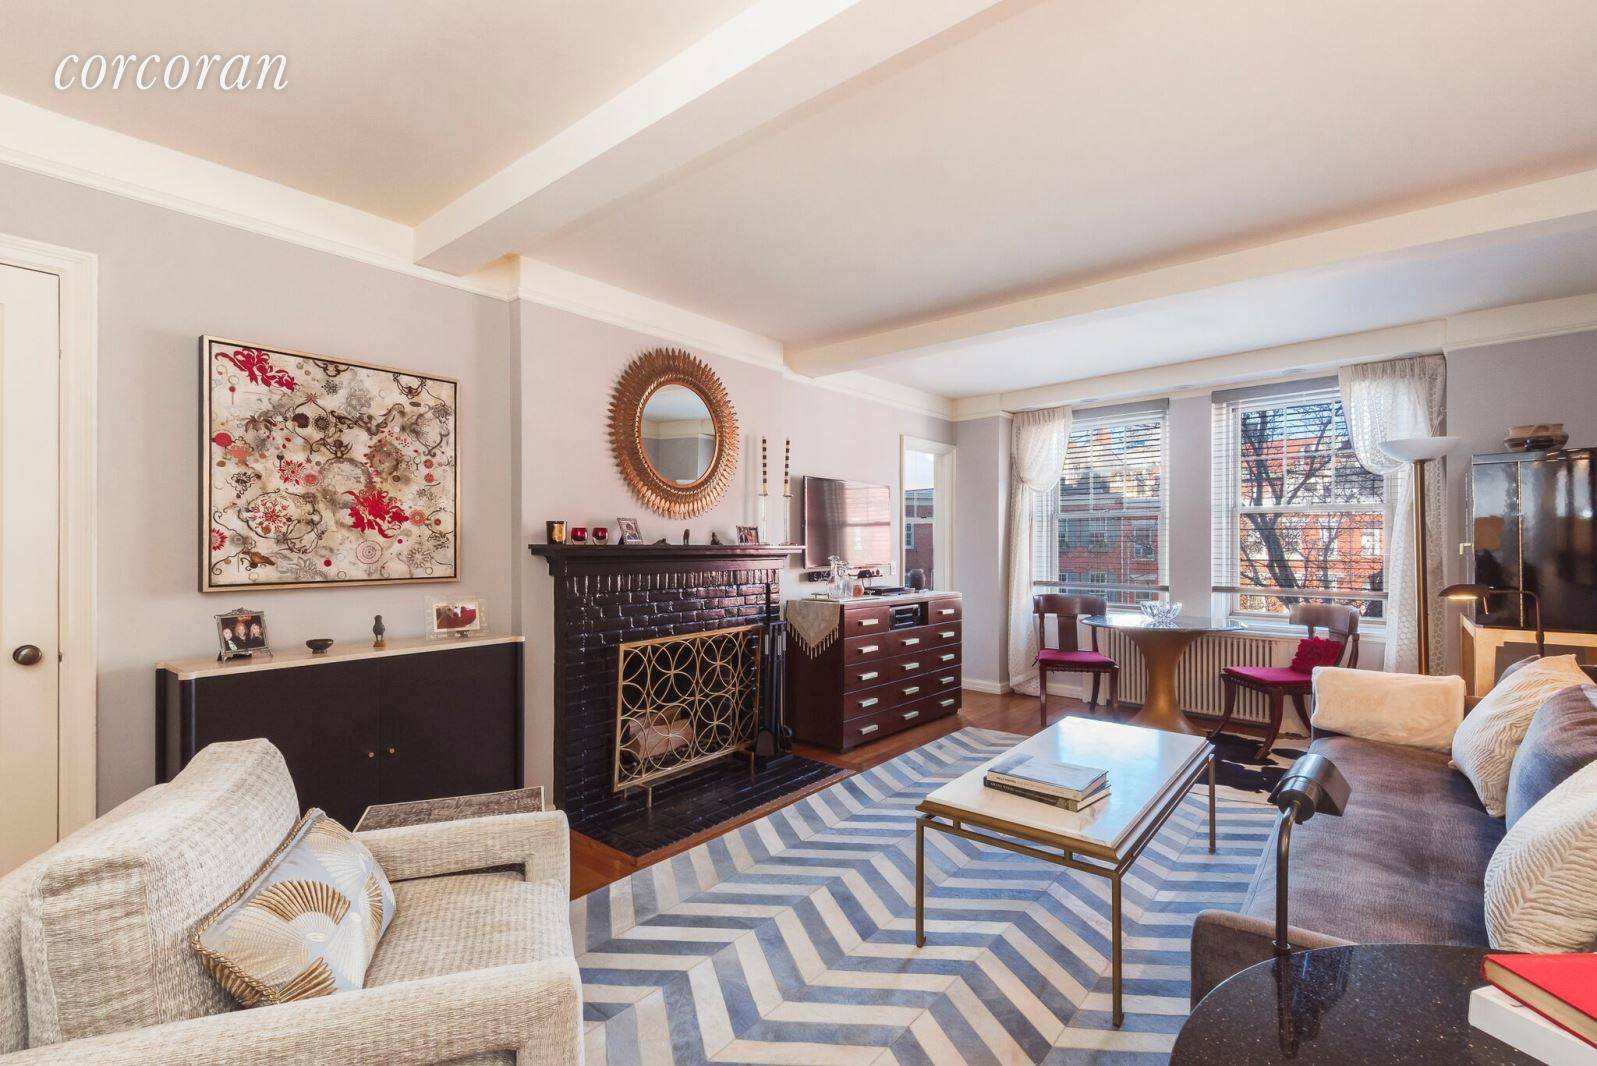 Located in one of the West Village's most sought after Bing amp ; Bing prewar condominiums, this charming one bedroom and one bath apartment is wonderfully perched over tree lined ...